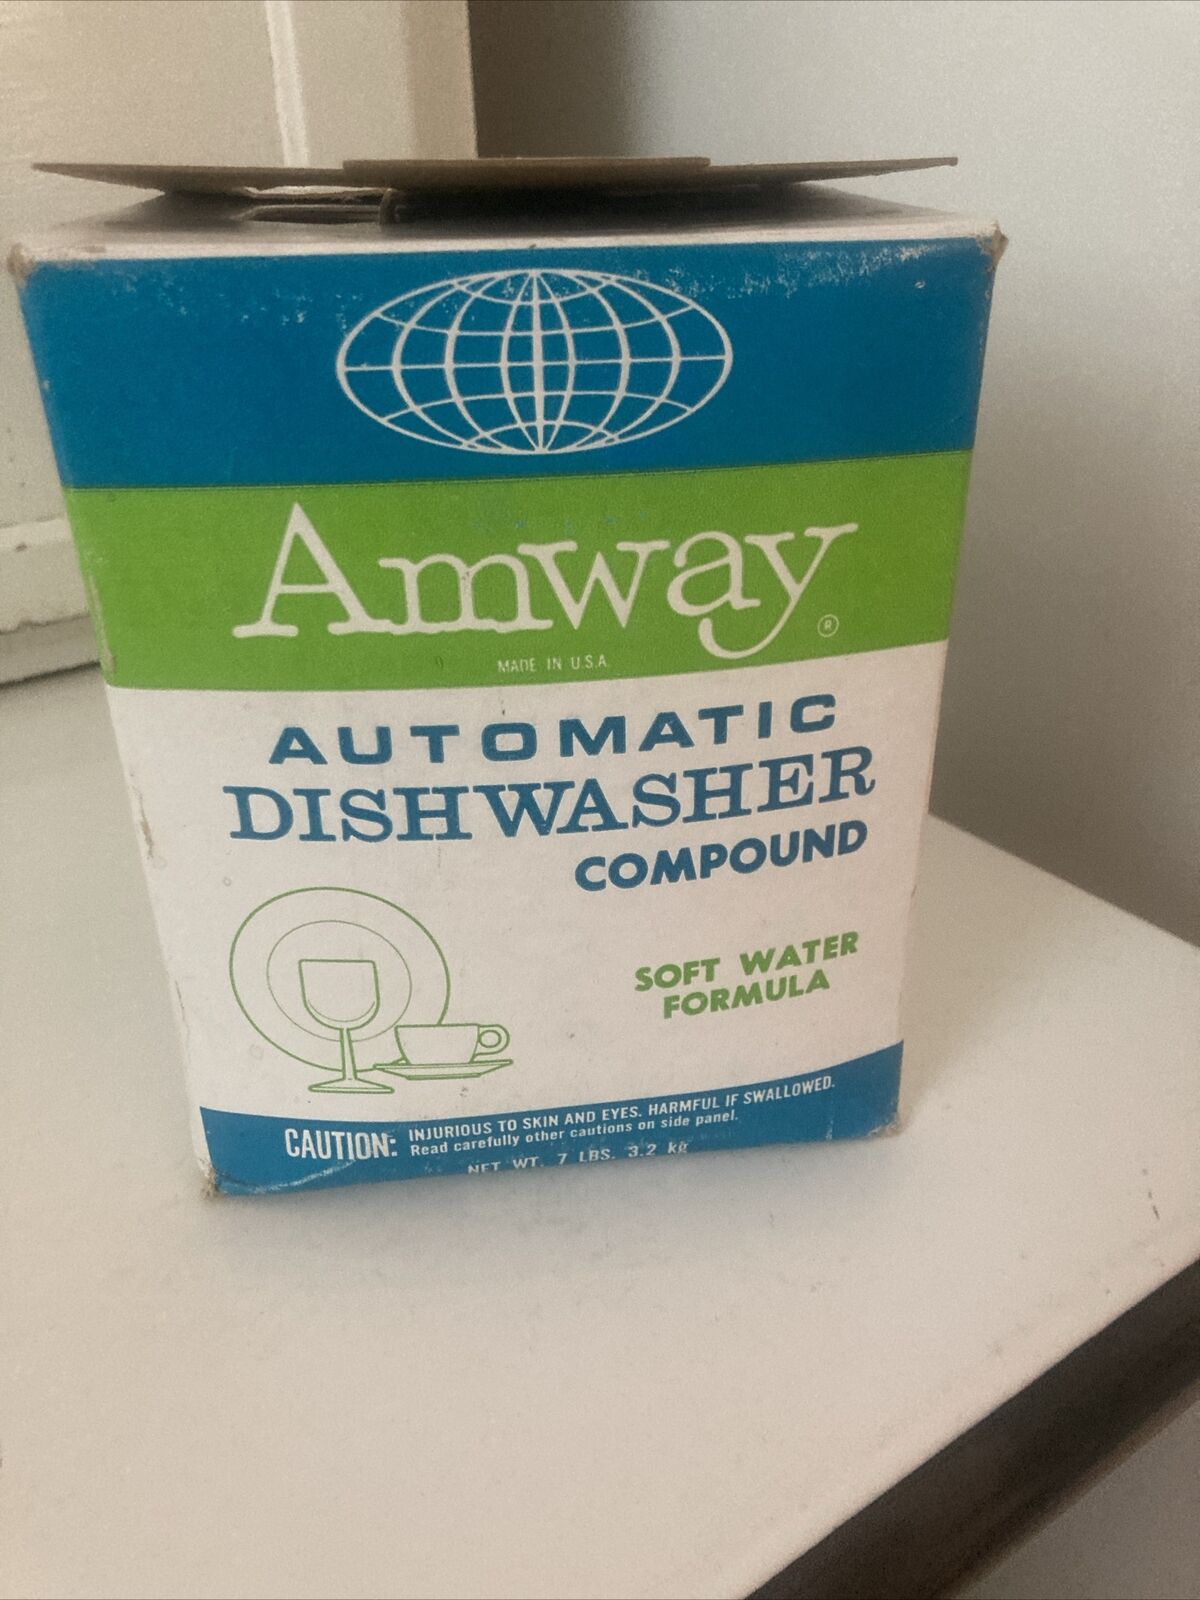 Vintage 1970’s Amway Automatic Dishwasher Compound Detergent 7LBS New Old Stock